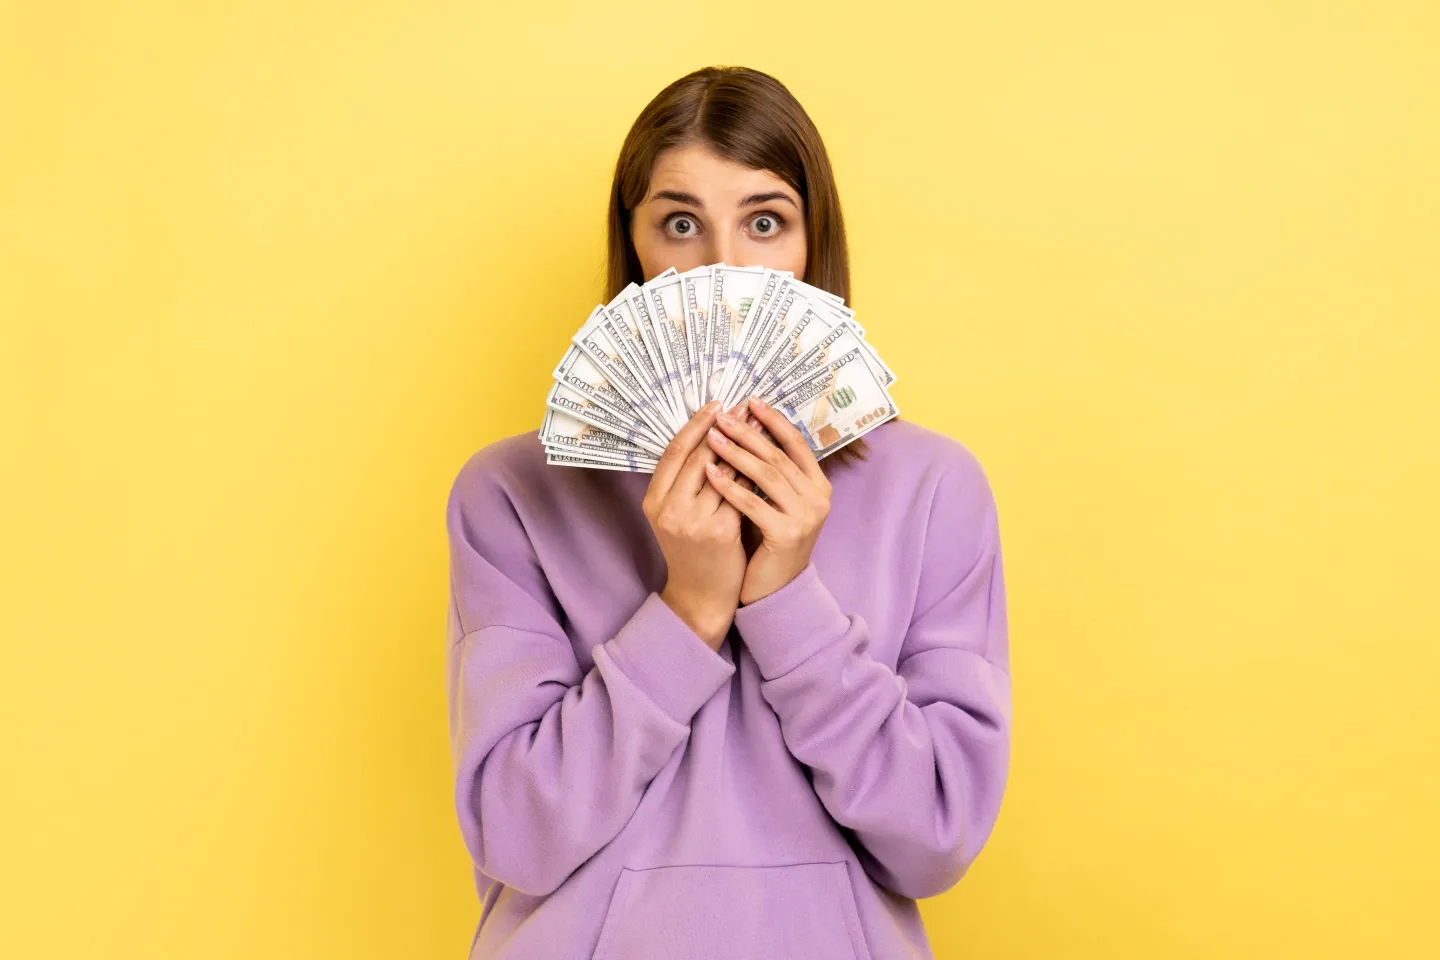 Portrait of amazed woman covering half of face with money and peeking out of dollars, excited to hold lot of cash, wearing purple hoodie. Indoor studio shot isolated on yellow background.